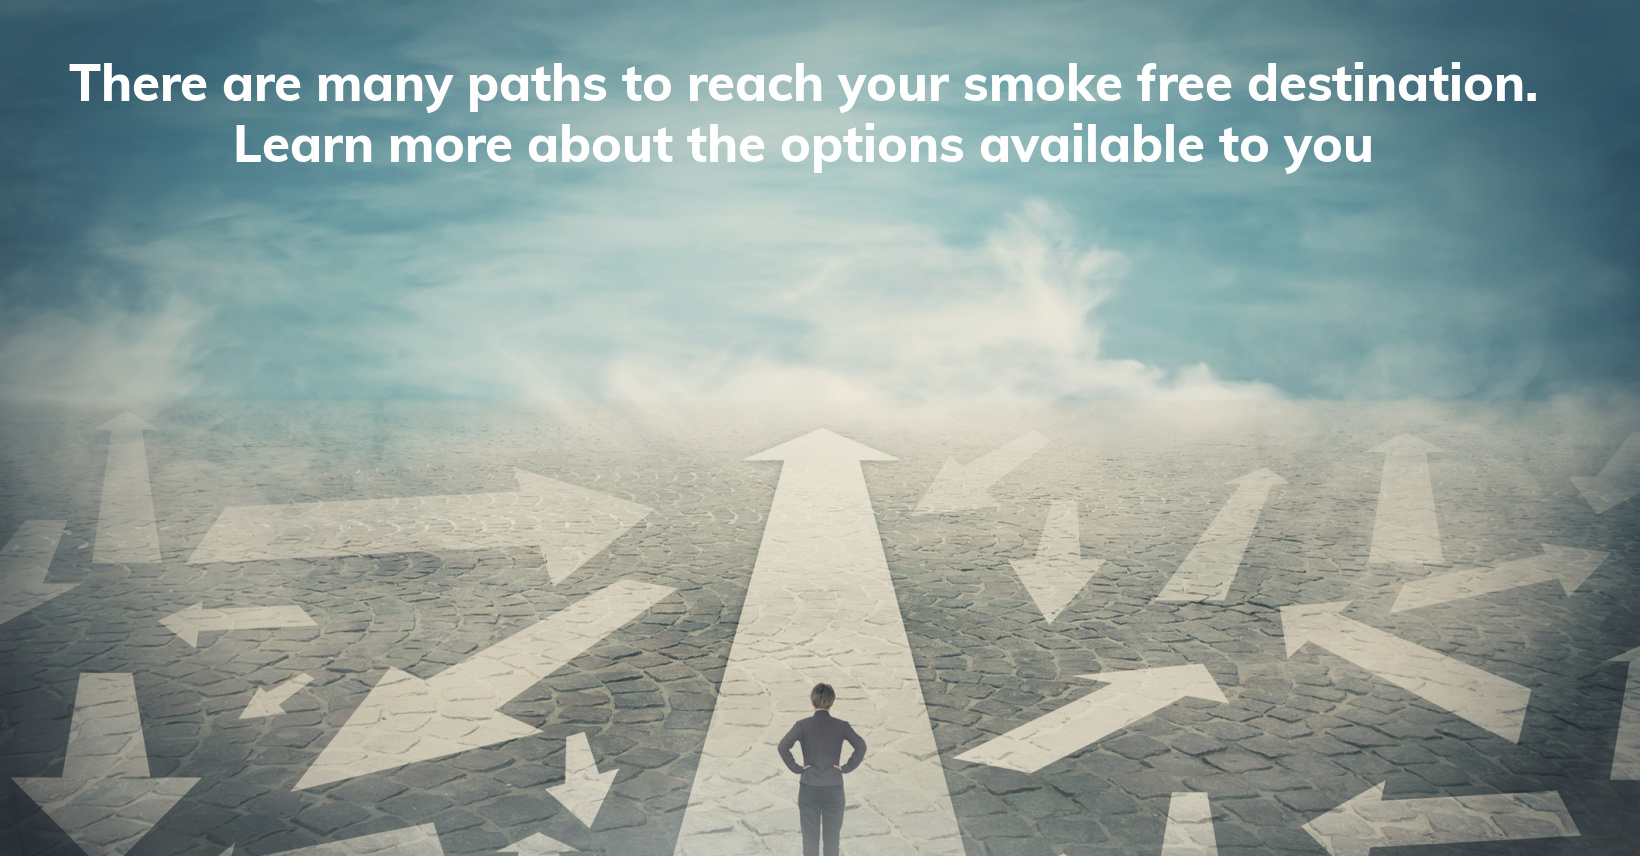 There are many paths to reach your smoke free destination. Learn more about the options available to you